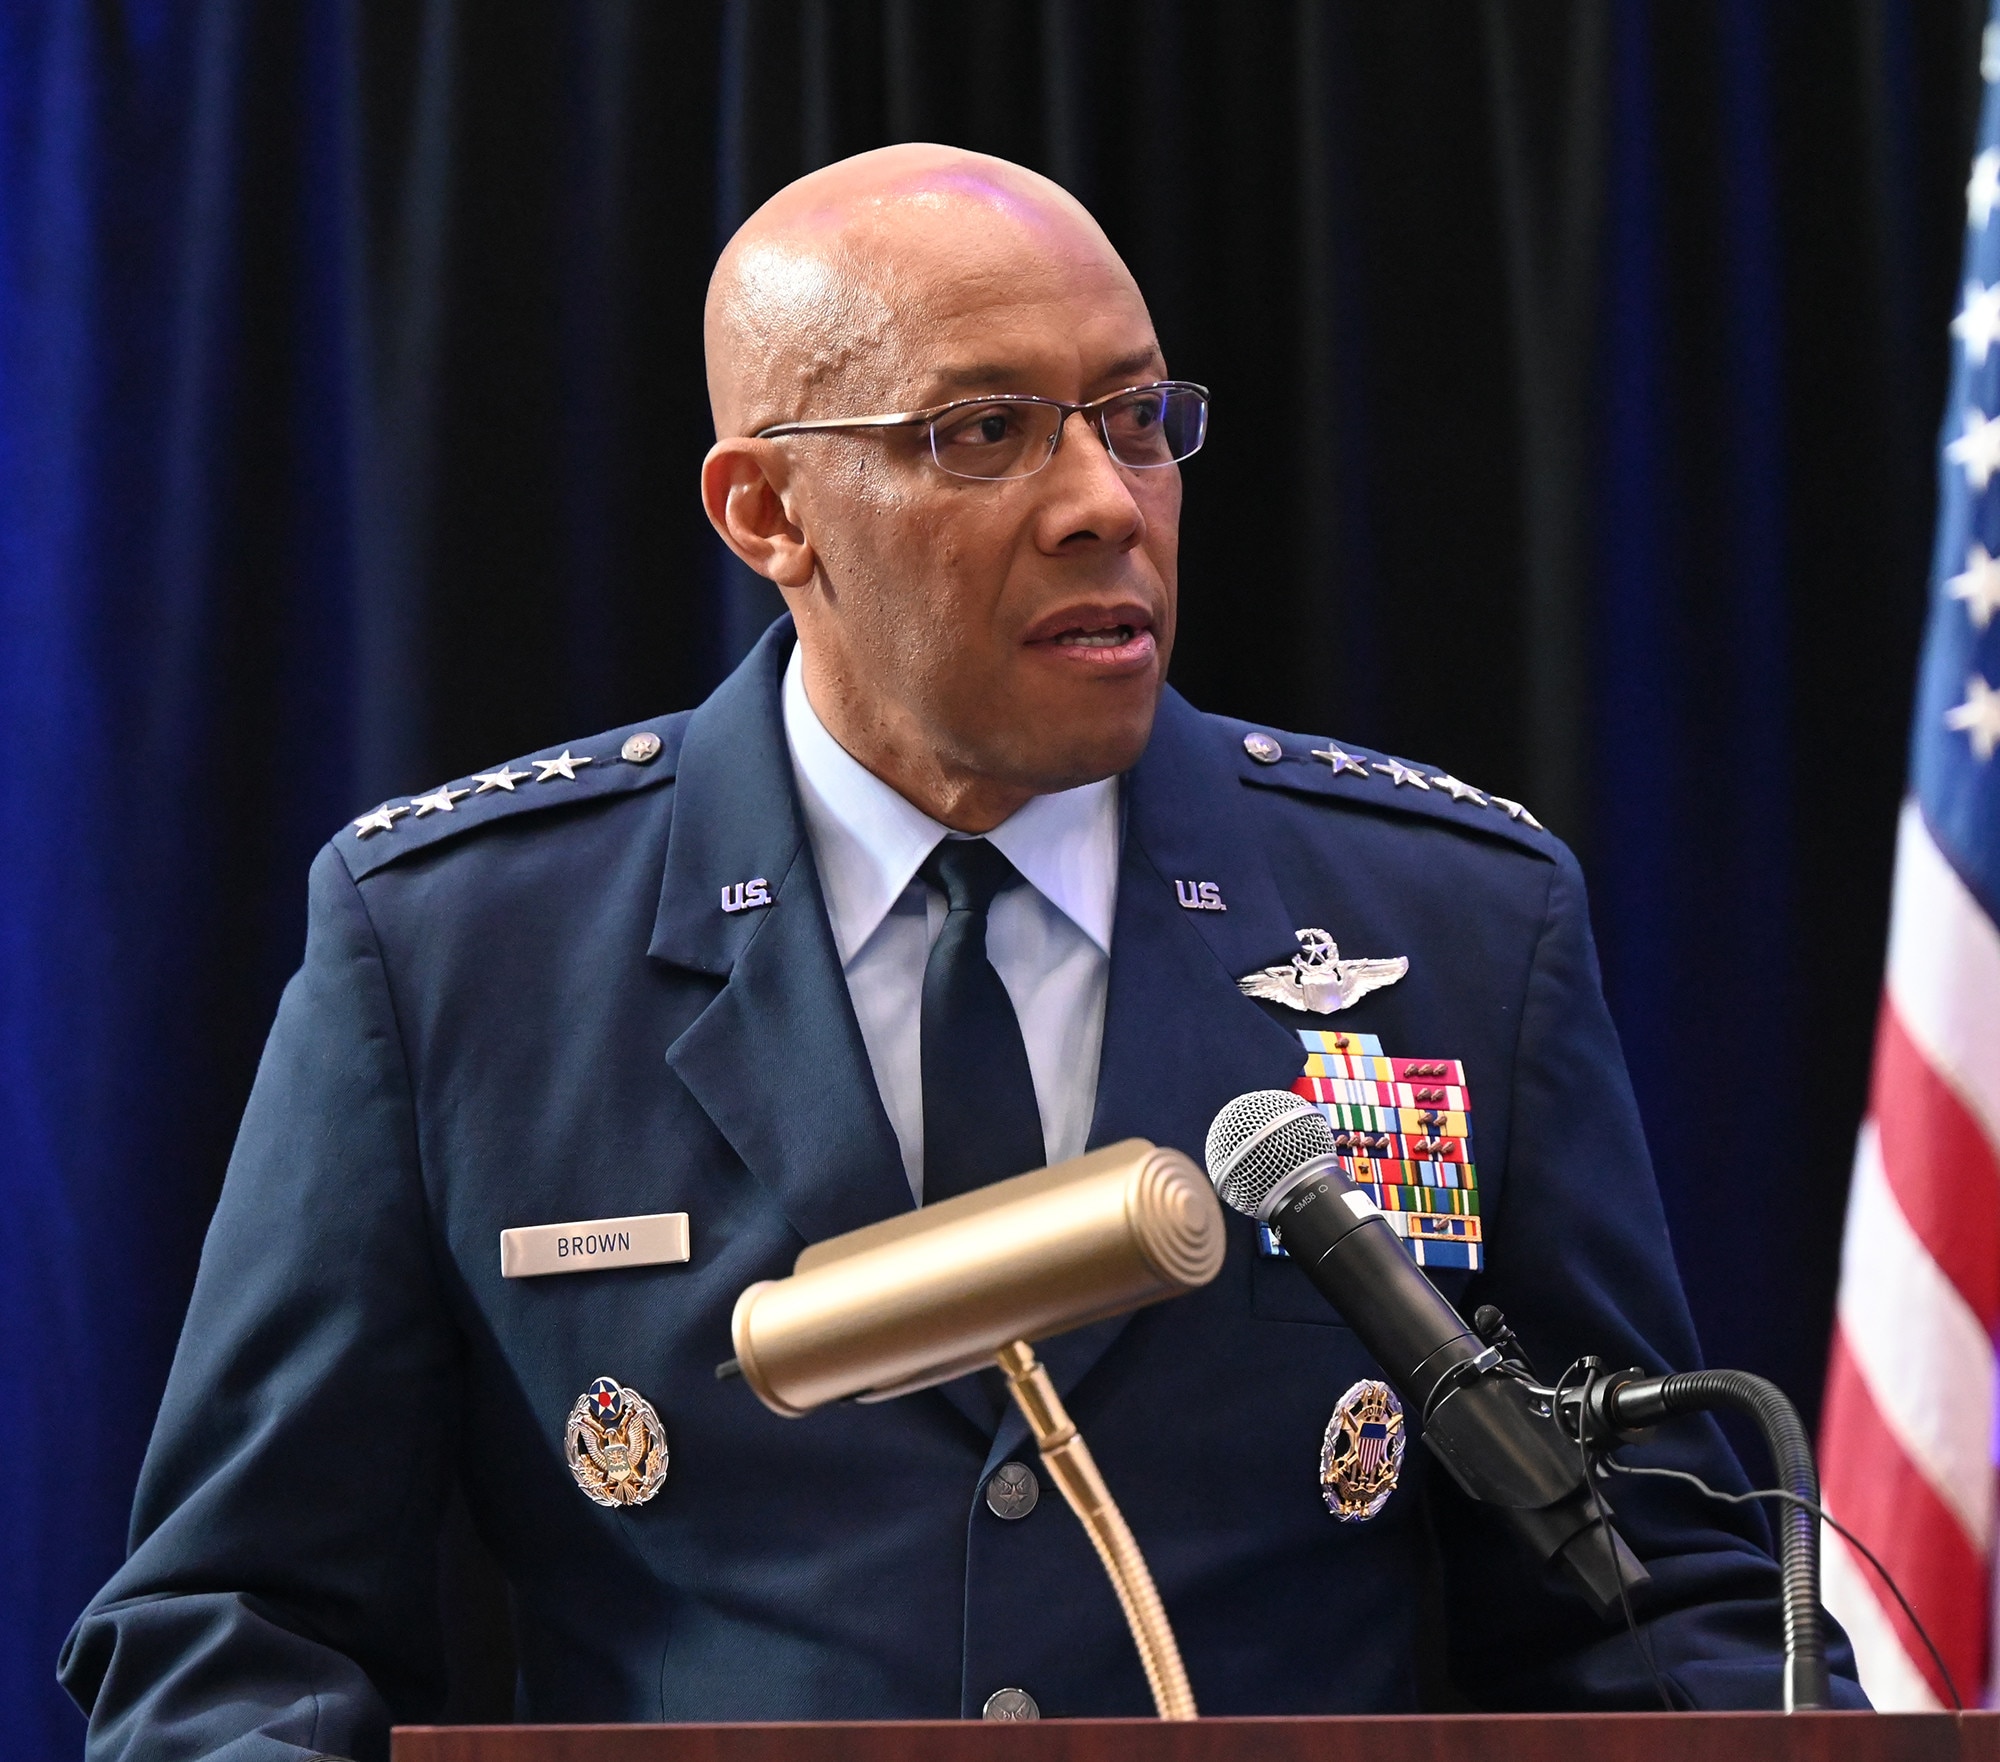 Chief of Staff of the Air Force Gen. CQ Brown, Jr., addresses the audience during the Brig. Gen. Charles E. McGee Leadership Award ceremony at the Samuel Riggs IV Alumni Center, University of Maryland, College Park, Md., Jan 27, 2023.